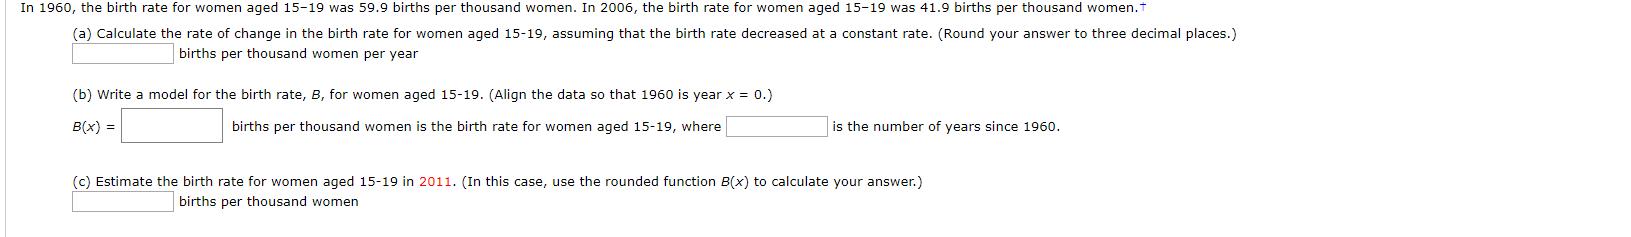 In 1960, the birth rate for women aged 15-19 was 59.9 births per thousand women. In 2006, the birth rate for women aged 15-19 was 41.9 births per thousand women.t
(a) Calculate the rate of change in the birth rate for women aged 15-19, assuming that the birth rate decreased at a constant rate. (Round your answer to three decimal places.)
births per thousand women per year
(b) Write a model for the birth rate, B, for women aged 15-19. (Align the data so that 1960 is year x 0.)
is the number of years since 1960
B(x)
births per thousand women is the birth rate for women aged 15-19, where
(c) Estimate the birth rate for women aged 15-19 in 2011. (In this case, use the rounded function B(x) to calculate your answer.)
births per thousand women
